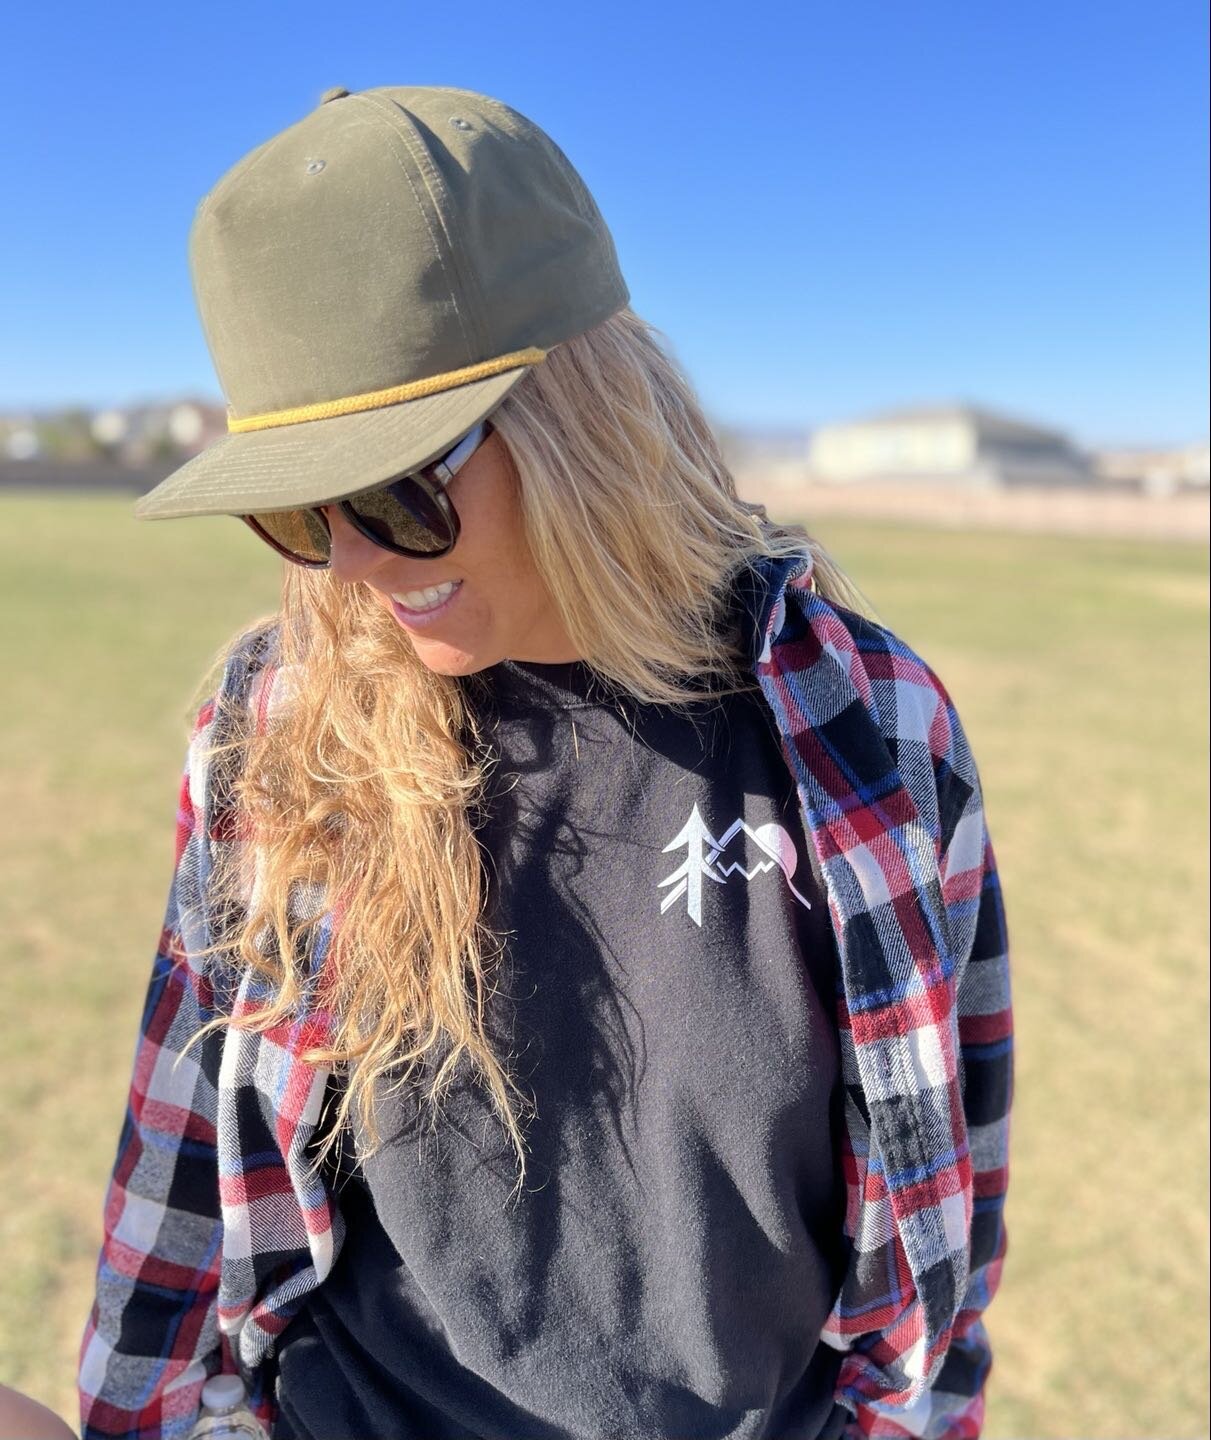 The last of sweater season&hellip;get yours before they are gone! #bunker .
.
.
#outdoorbehavior #getout #life #beachlife #hikeitout #pickleball #sgcity #getoutthere #live #1000hourchallenge #playmore #stressless #baseballseason #truegritepic #ironma